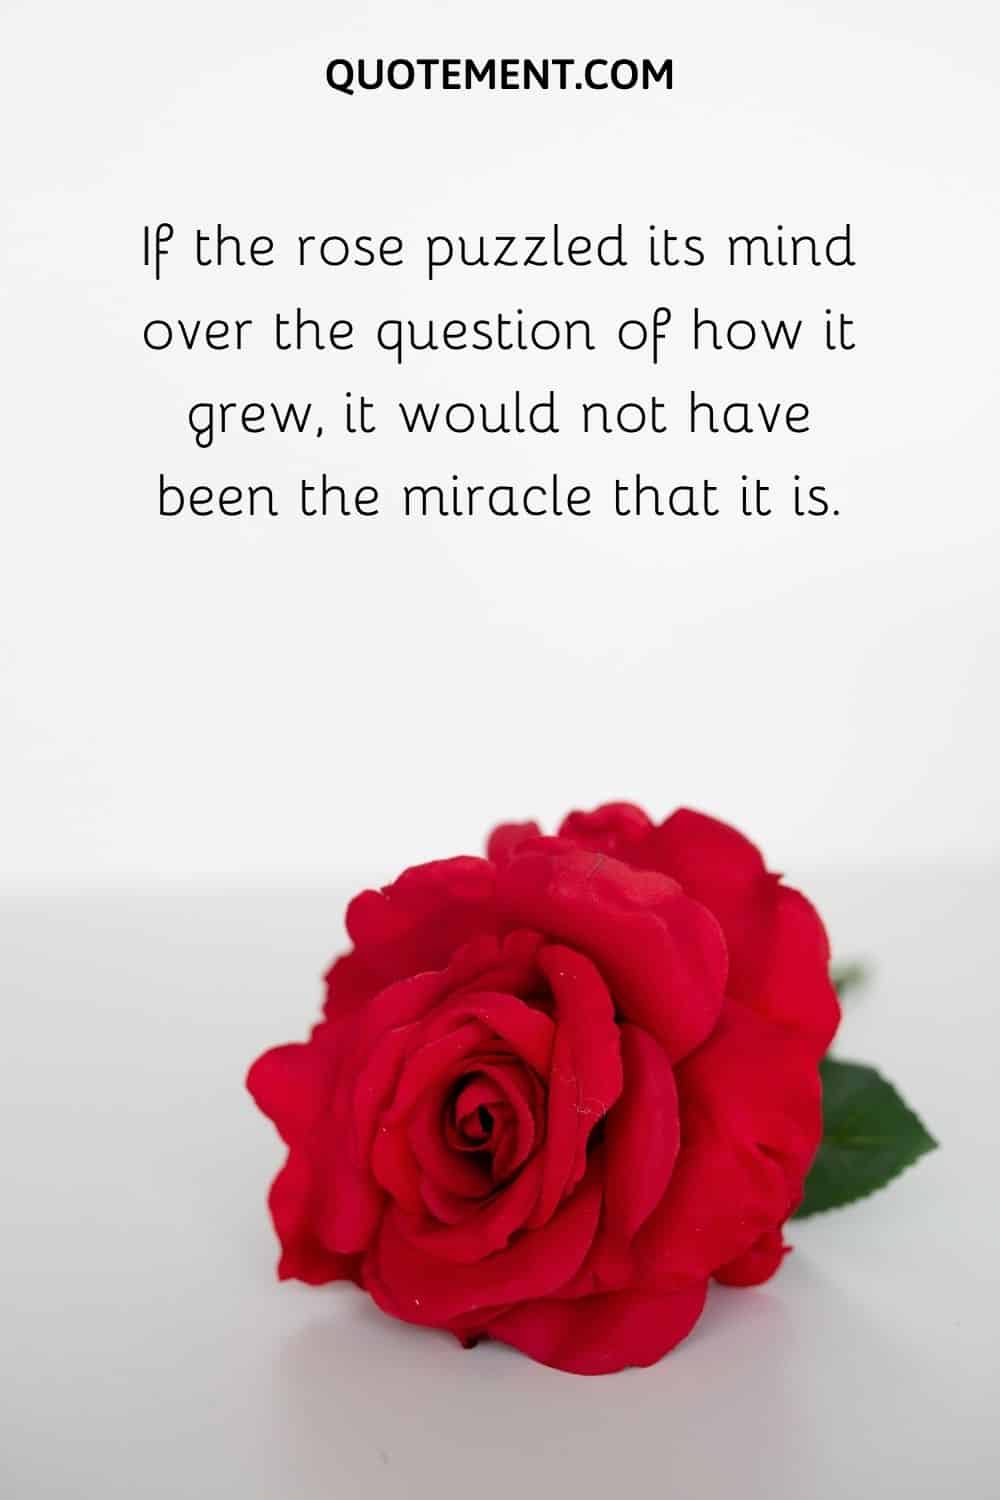 If the rose puzzled its mind over the question of how it grew, it would not have been the miracle that it is.